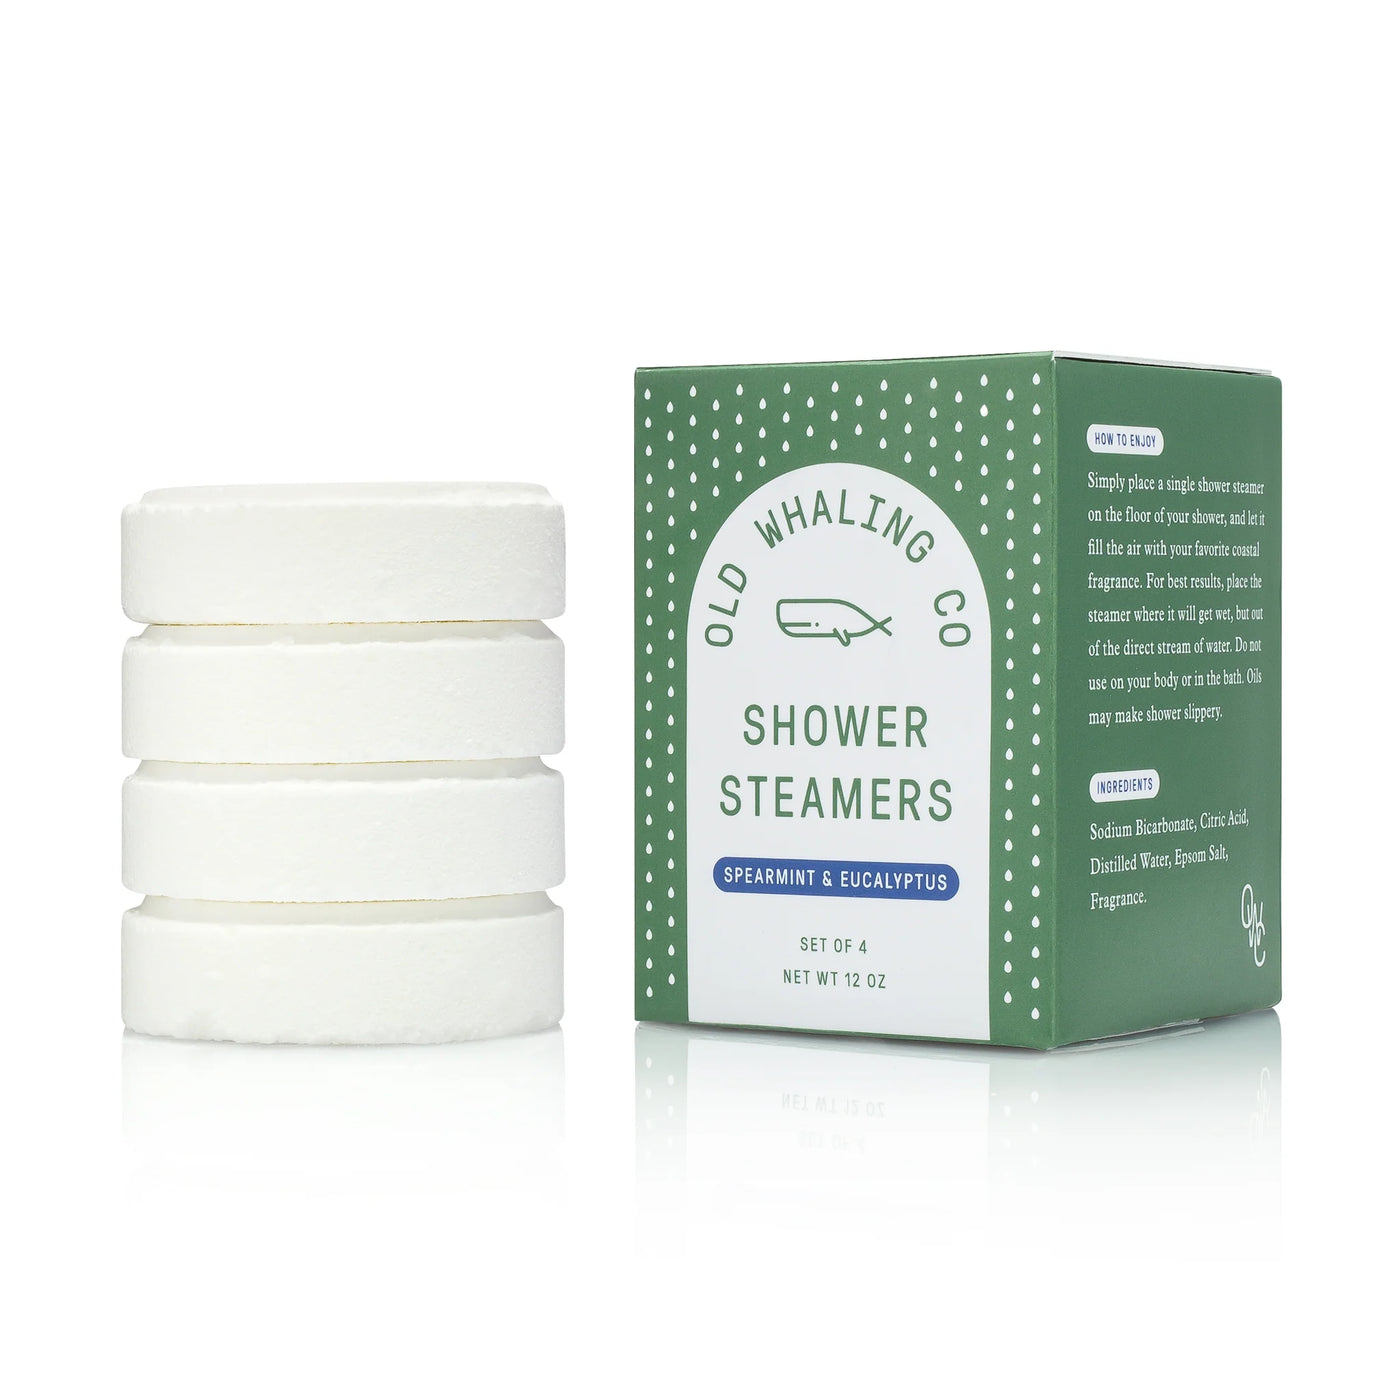 Old Whaling Co Shower Steamers Spearmint & Eucalyptus